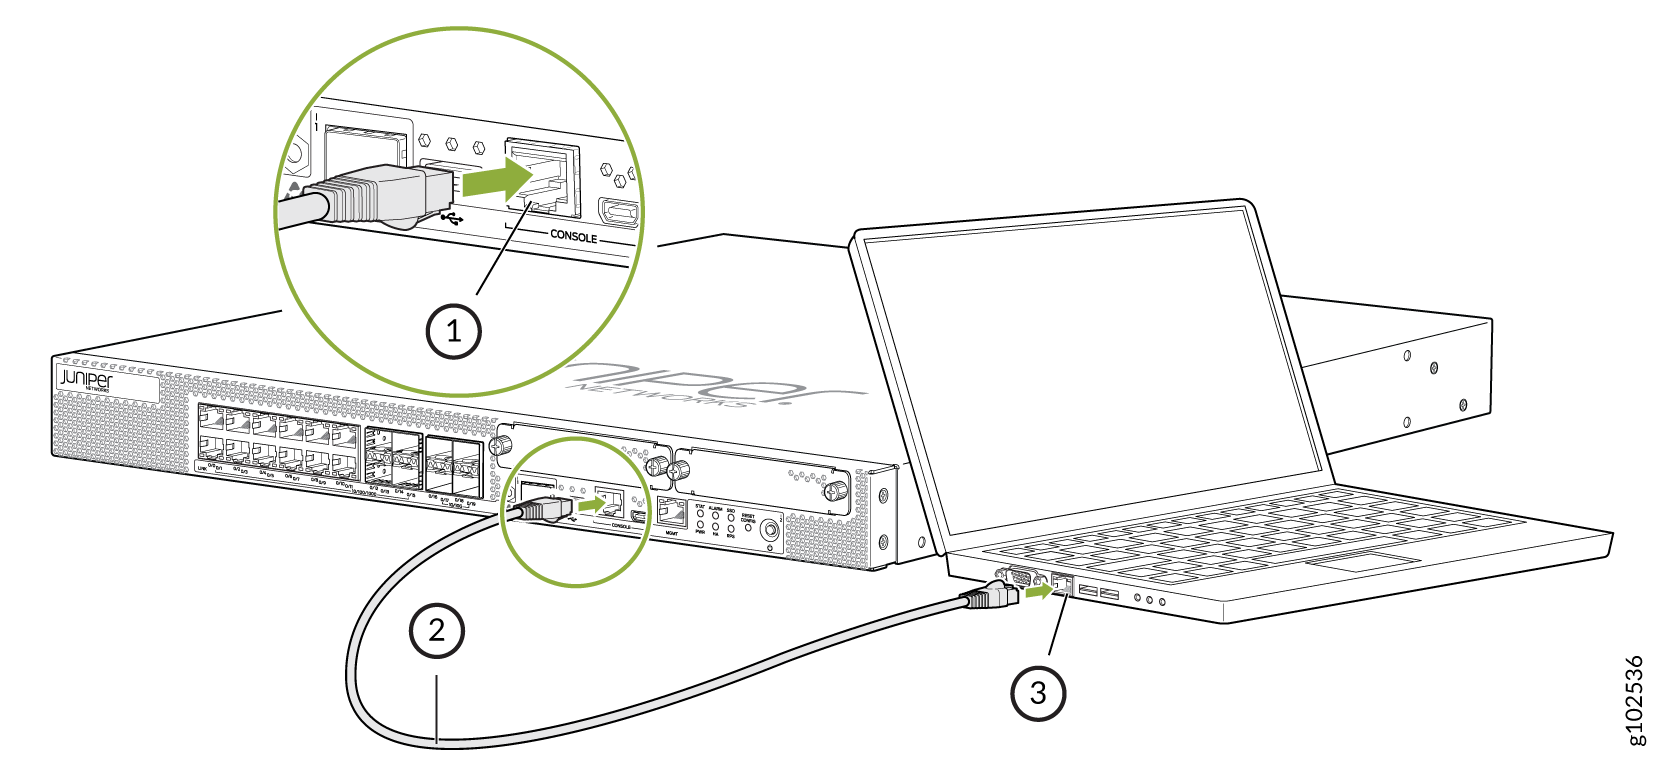 Connect to the Console Port on a Juniper Networks Device